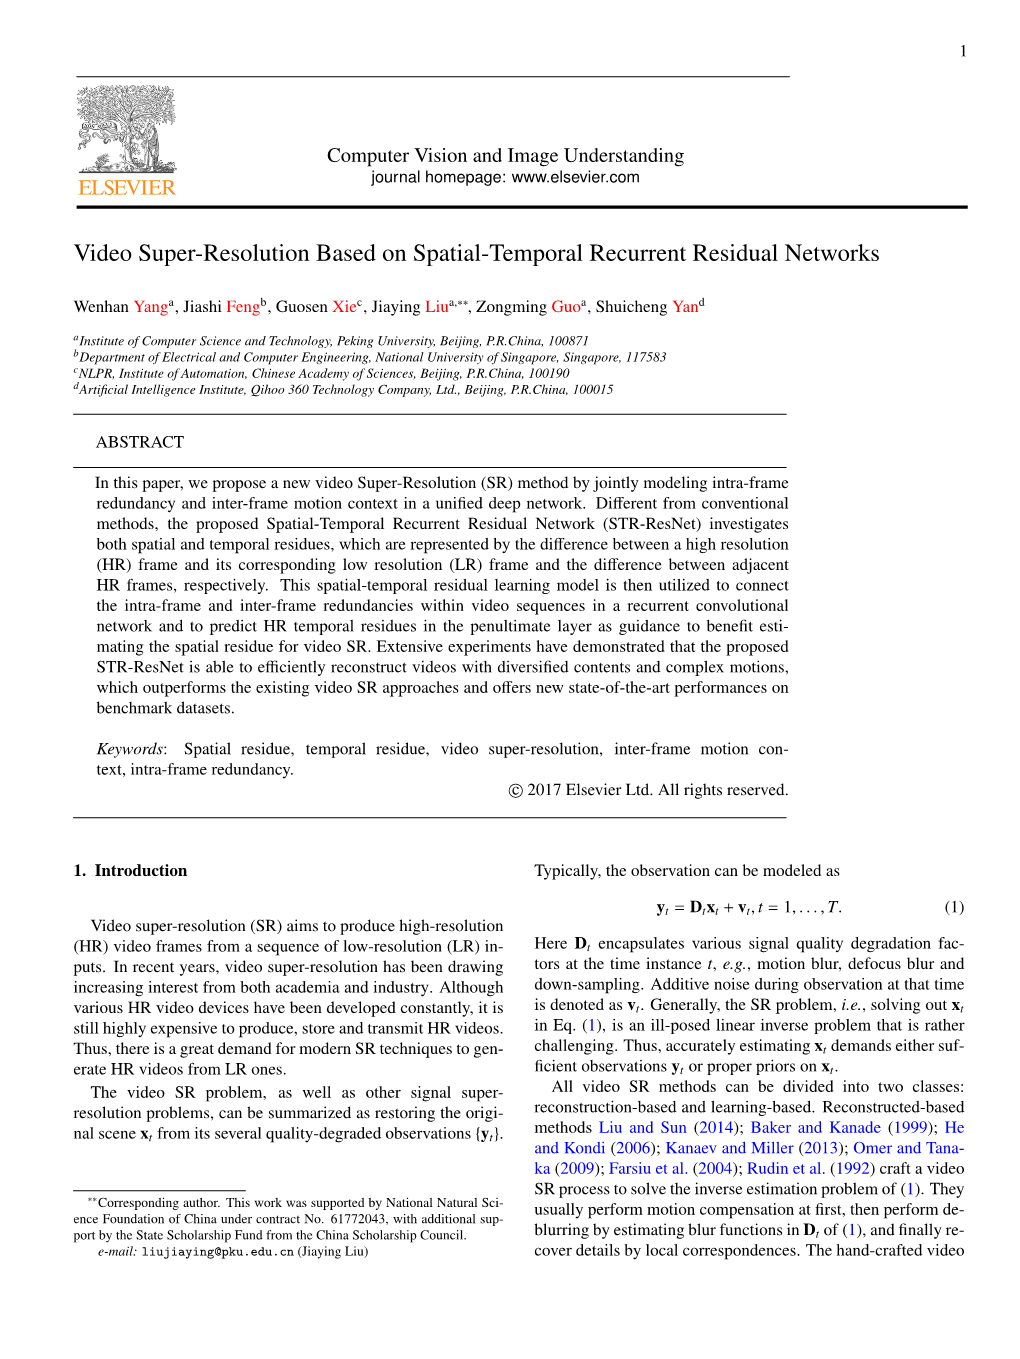 Video Super-Resolution Based on Spatial-Temporal Recurrent Residual Networks